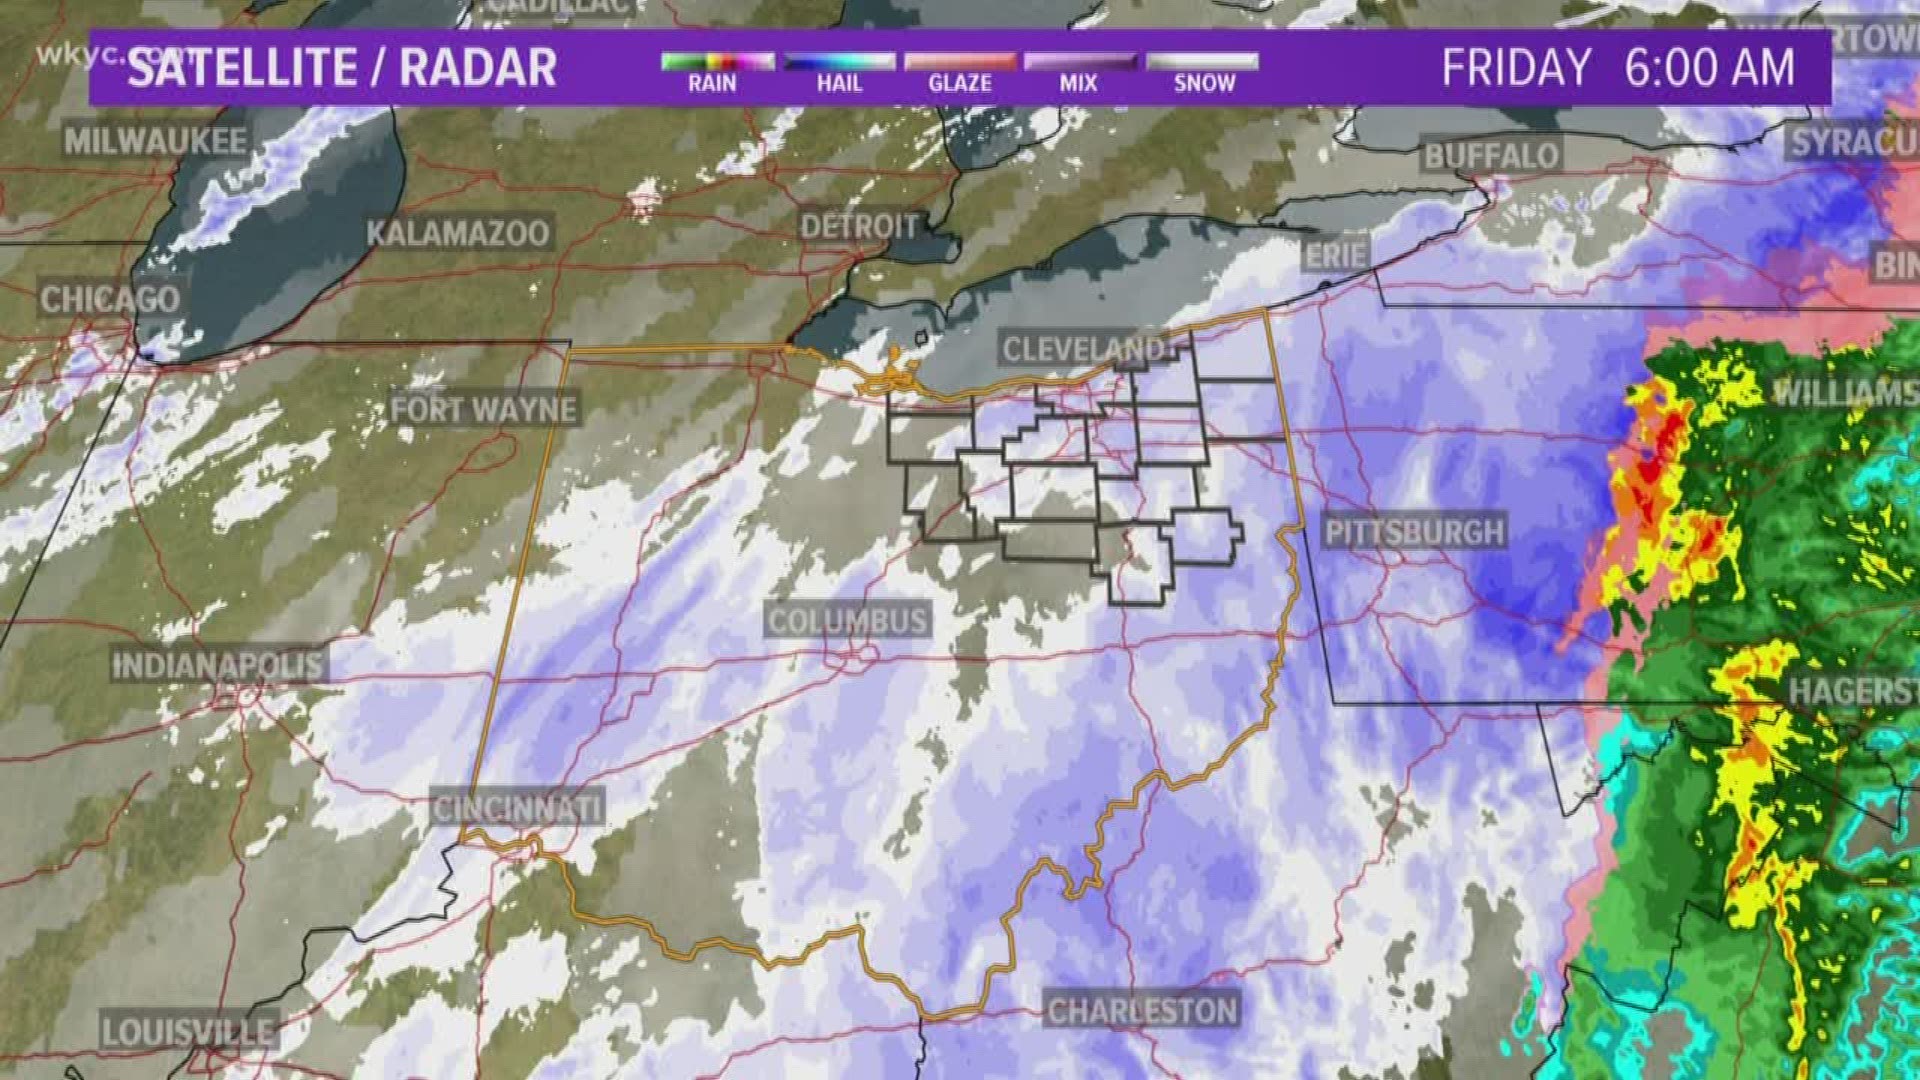 Dozens of school closings are coming in as snow hits Northeast Ohio. Here's our 6 a.m. team coverage of the evolving snow storm.